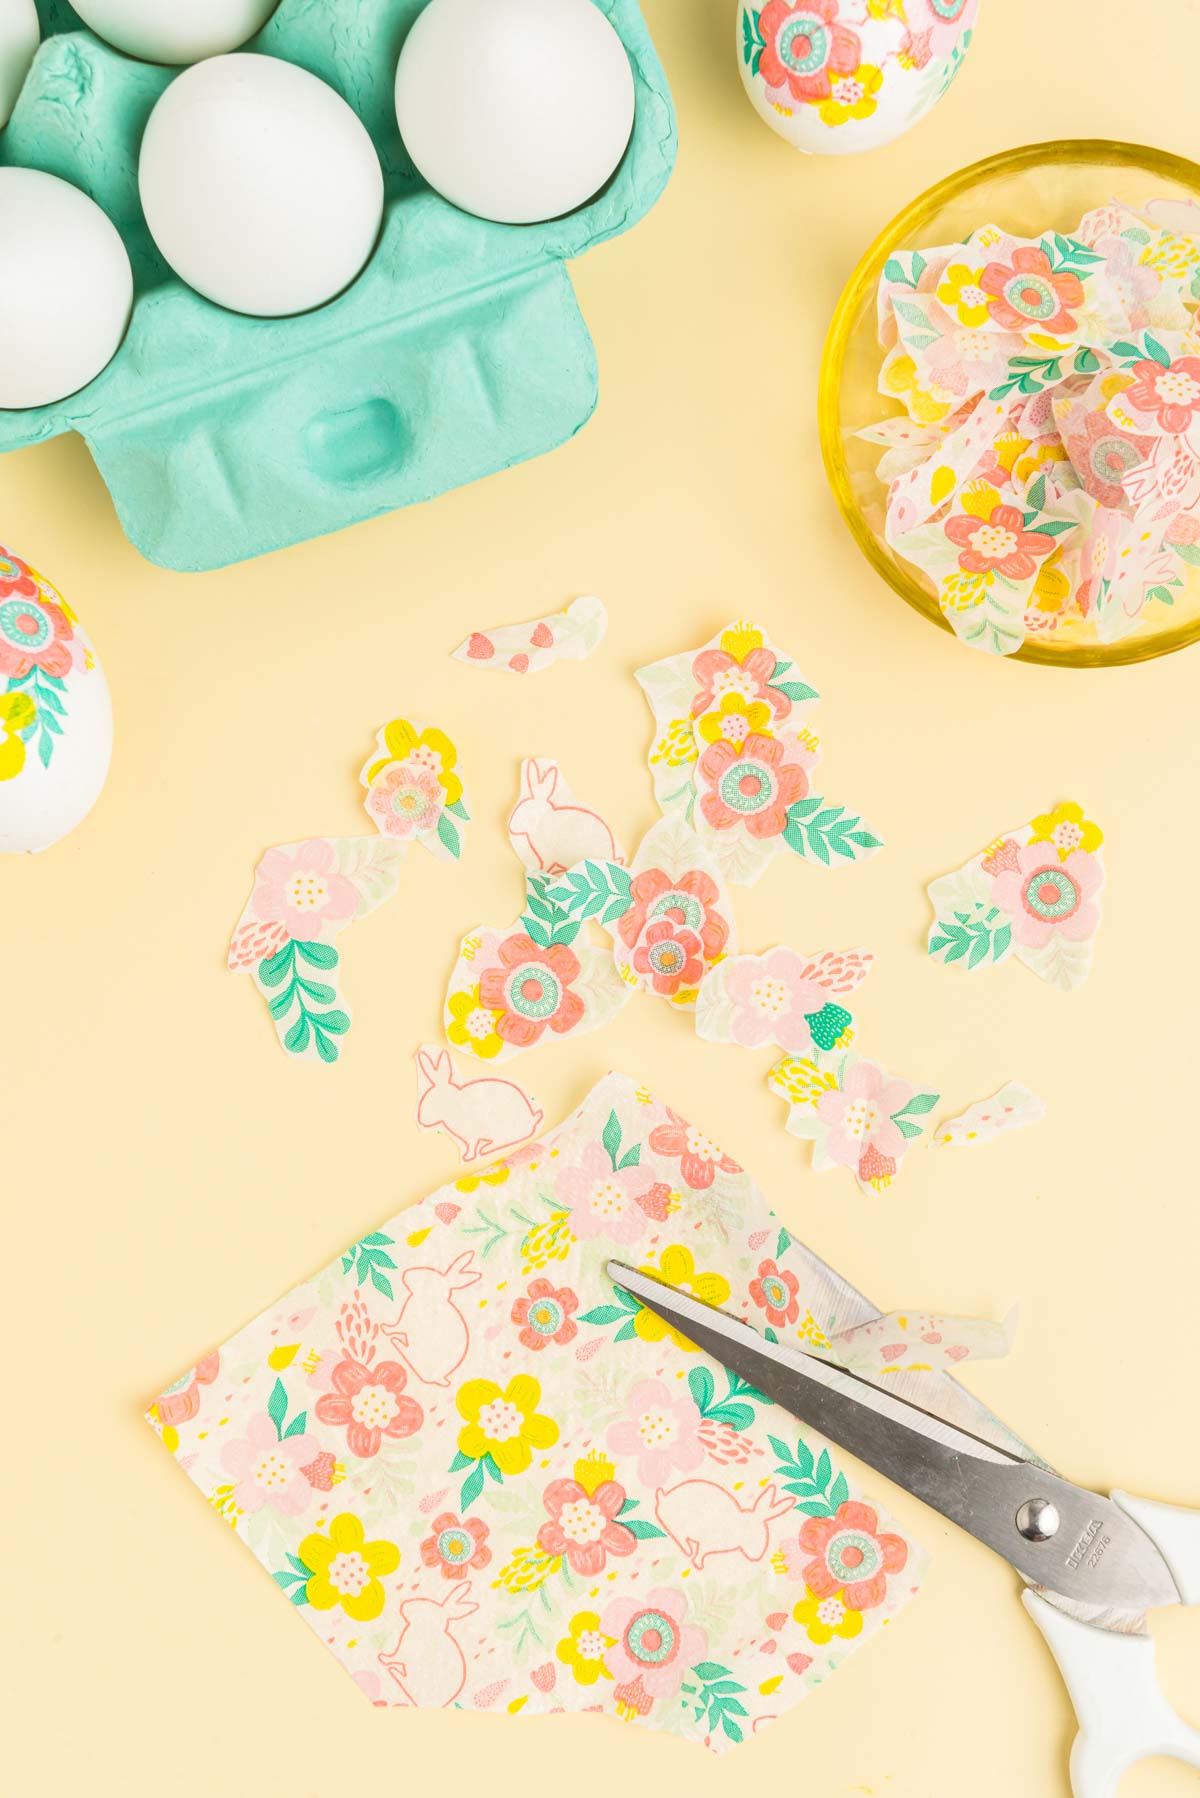 How to Decorate Easter Eggs with Decoupage Napkins - Play Party Plan